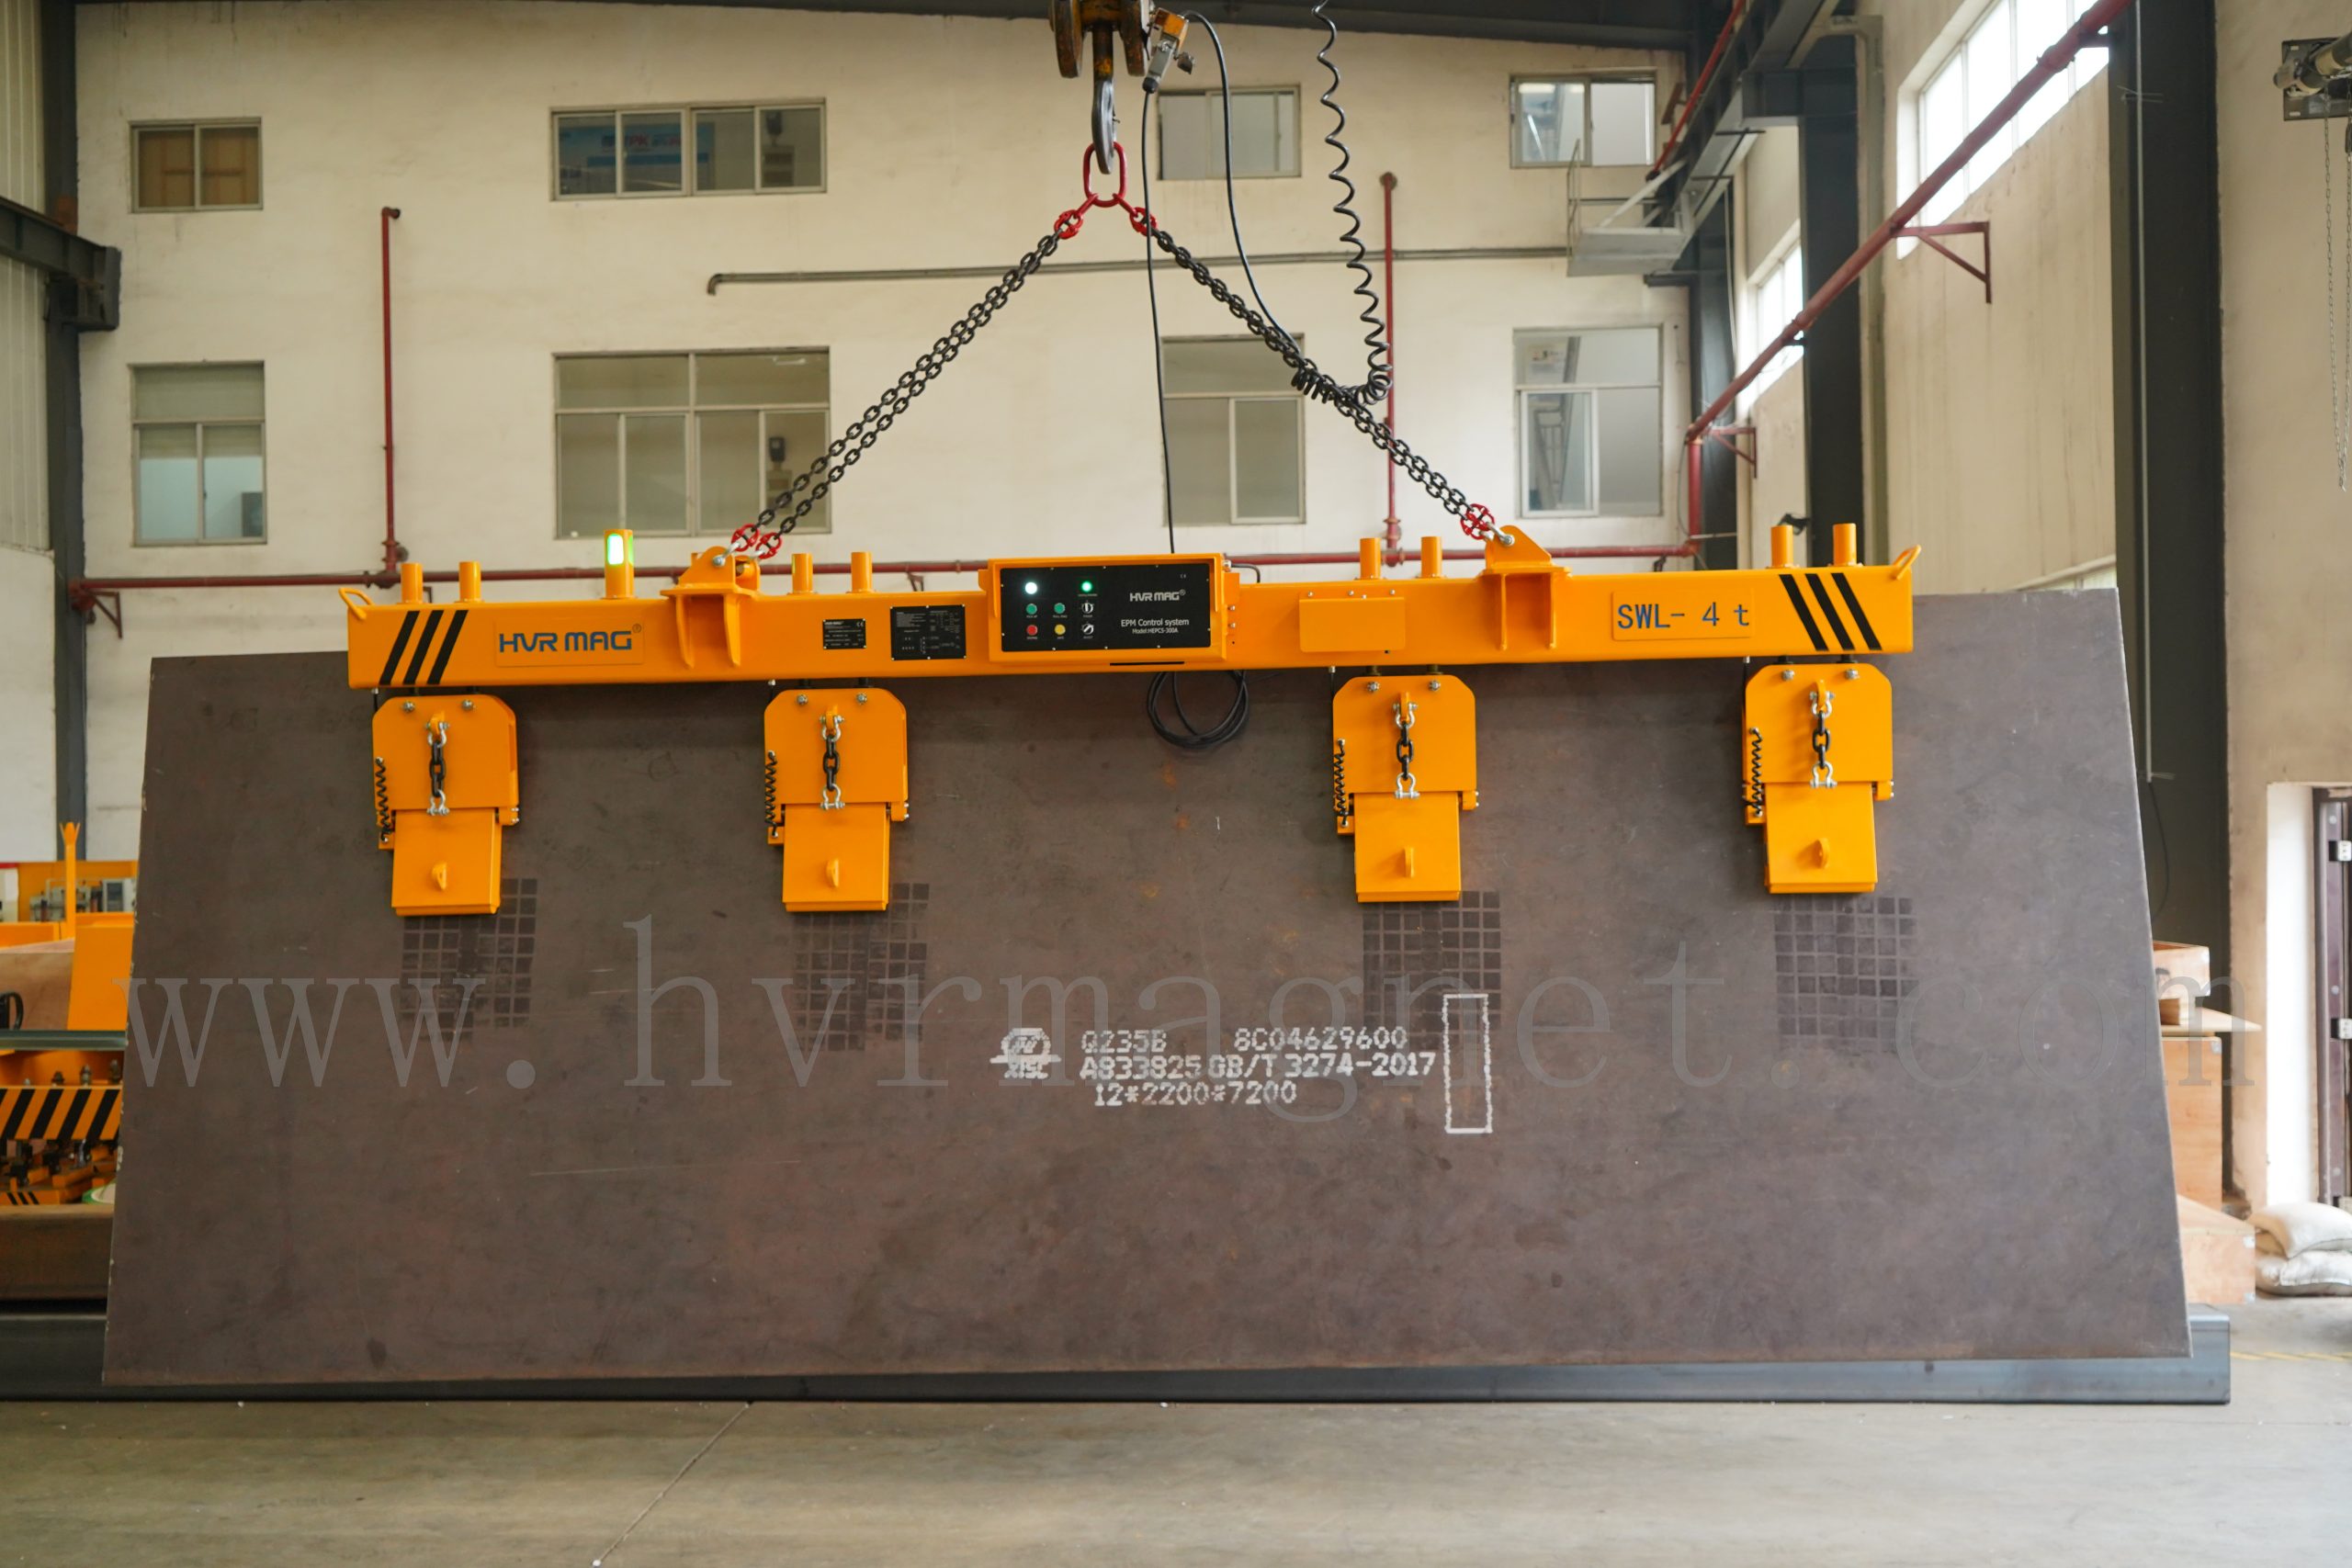 Safe operation of magnetic lifting devices